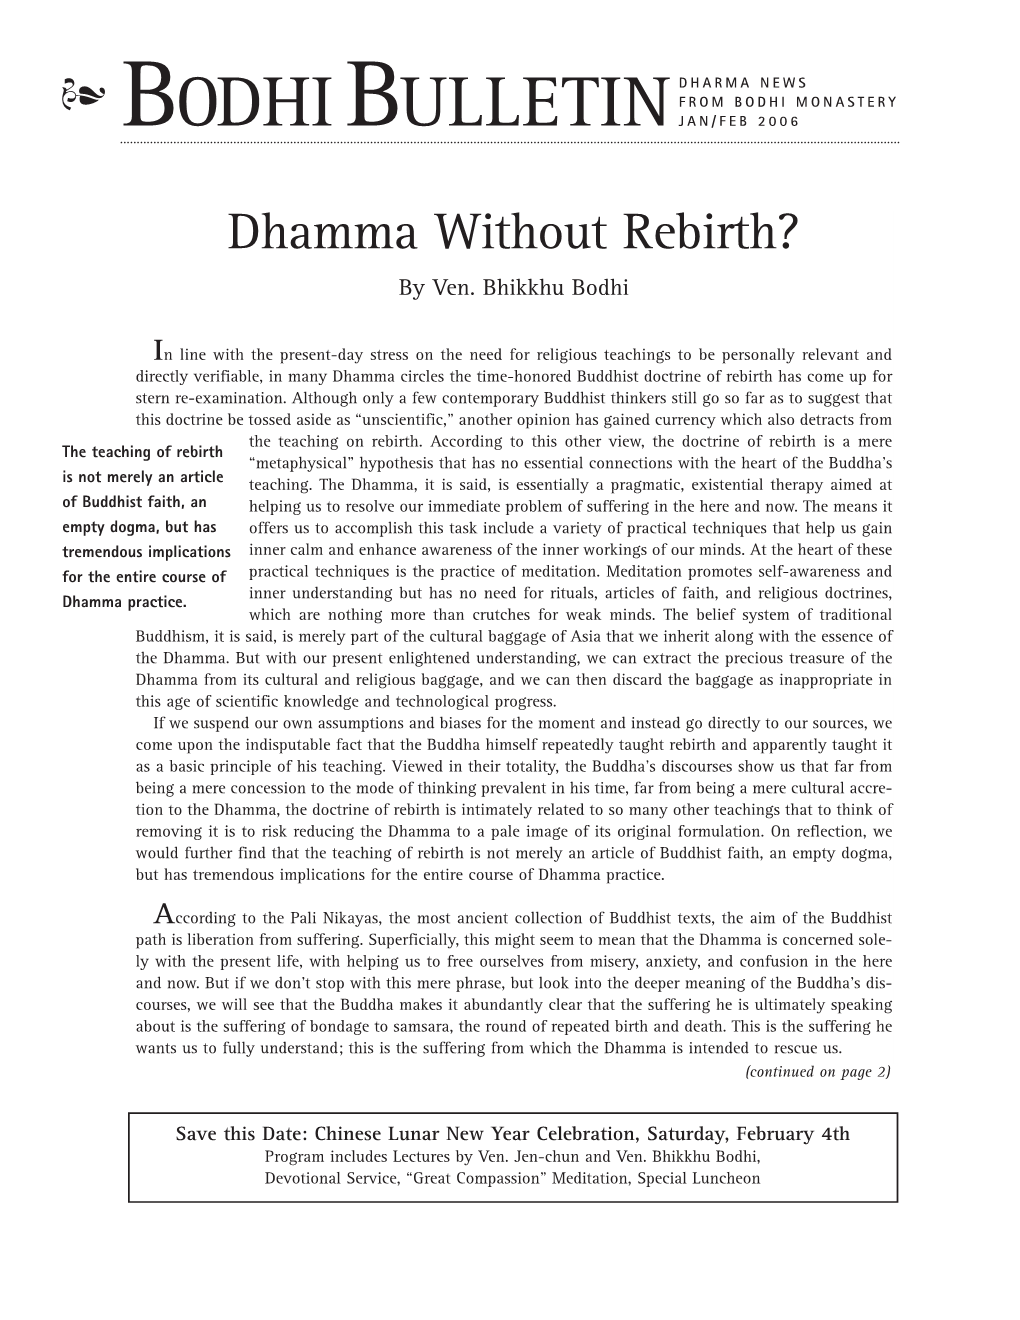 Dhamma Without Rebirth? by Ven